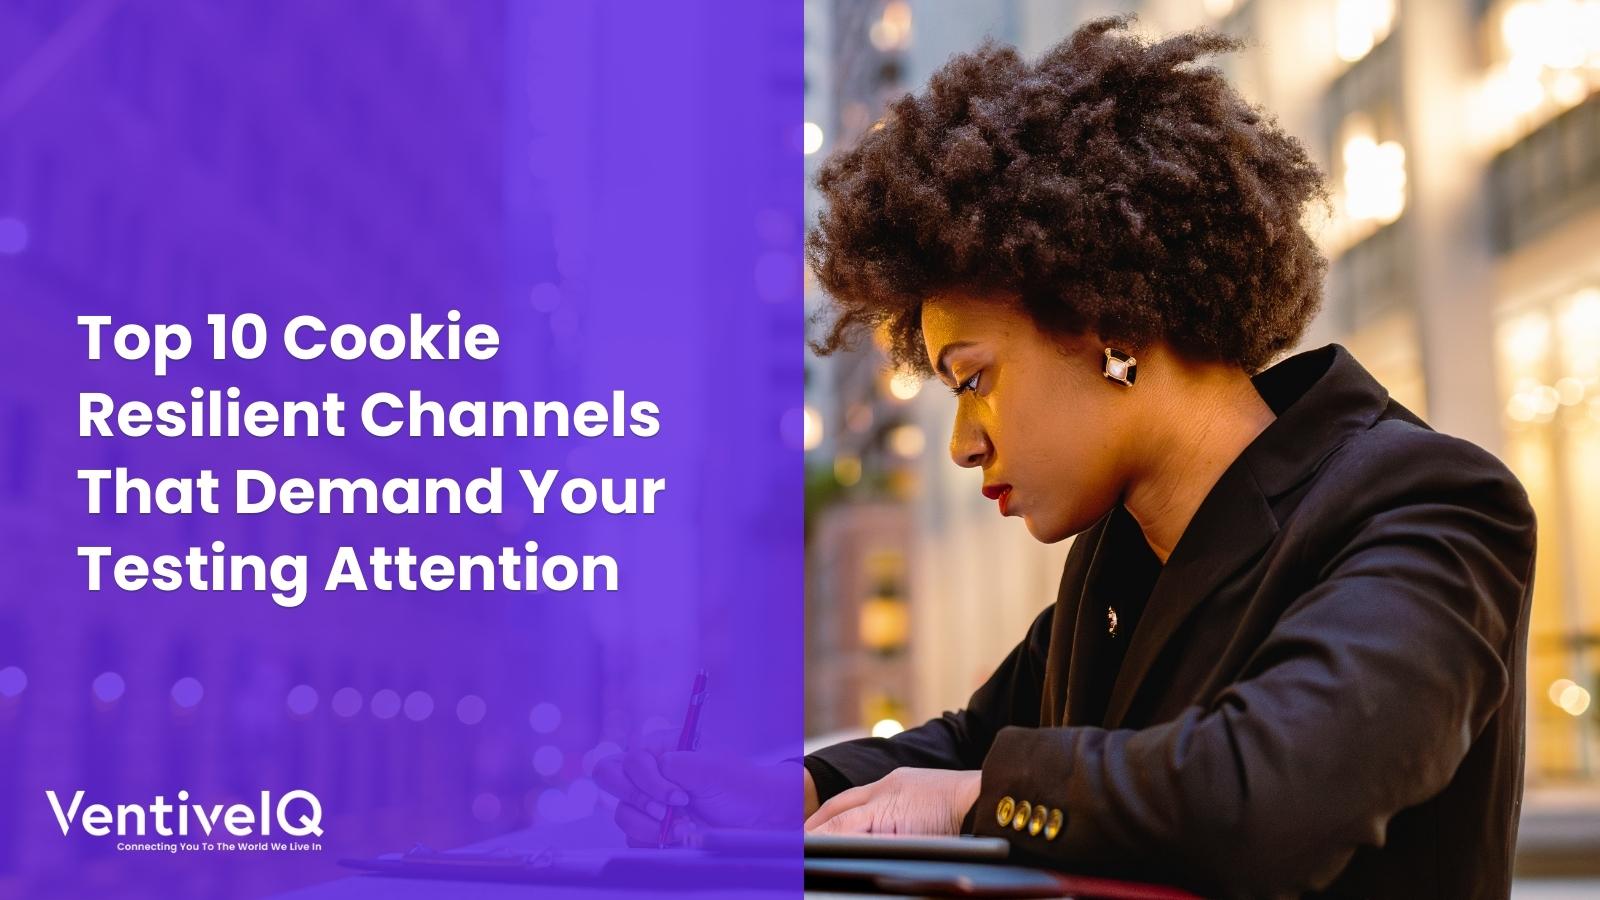 Top 10 Cookie Resilient Channels That Demand Your Testing Attention